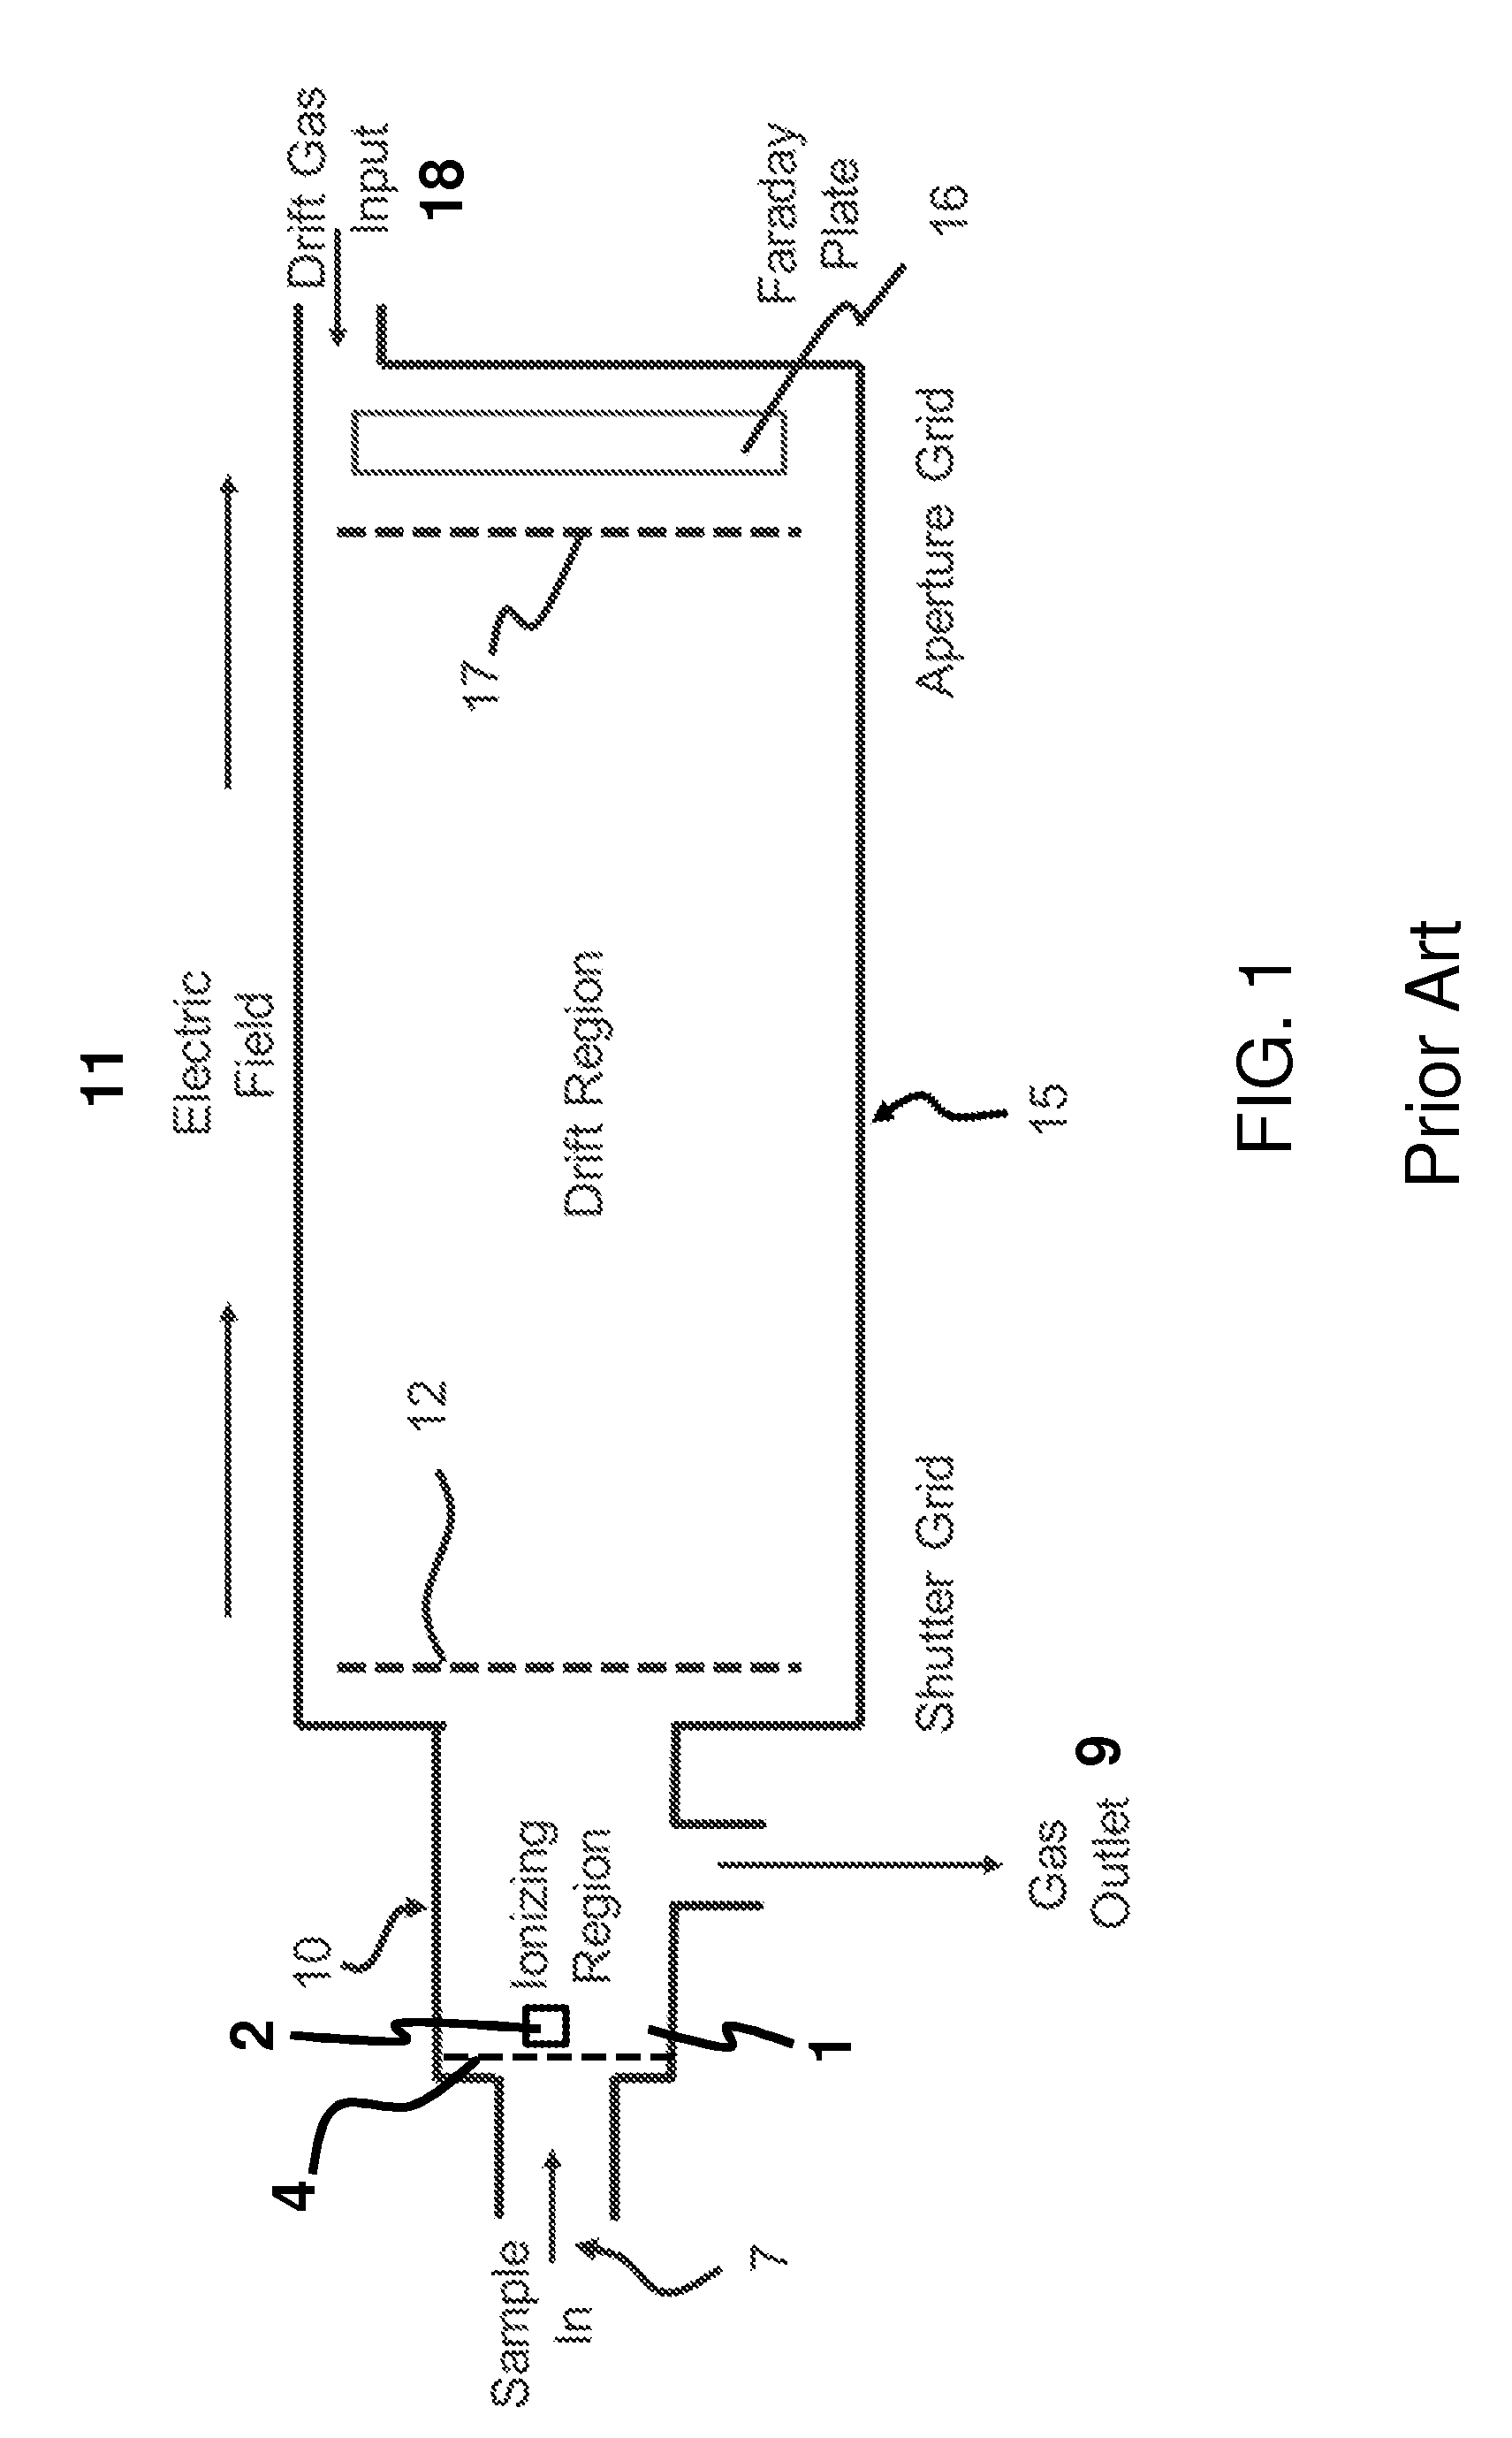 Sensitive Ion Detection Device and Method for Analysis of Compounds as Vapors in Gases